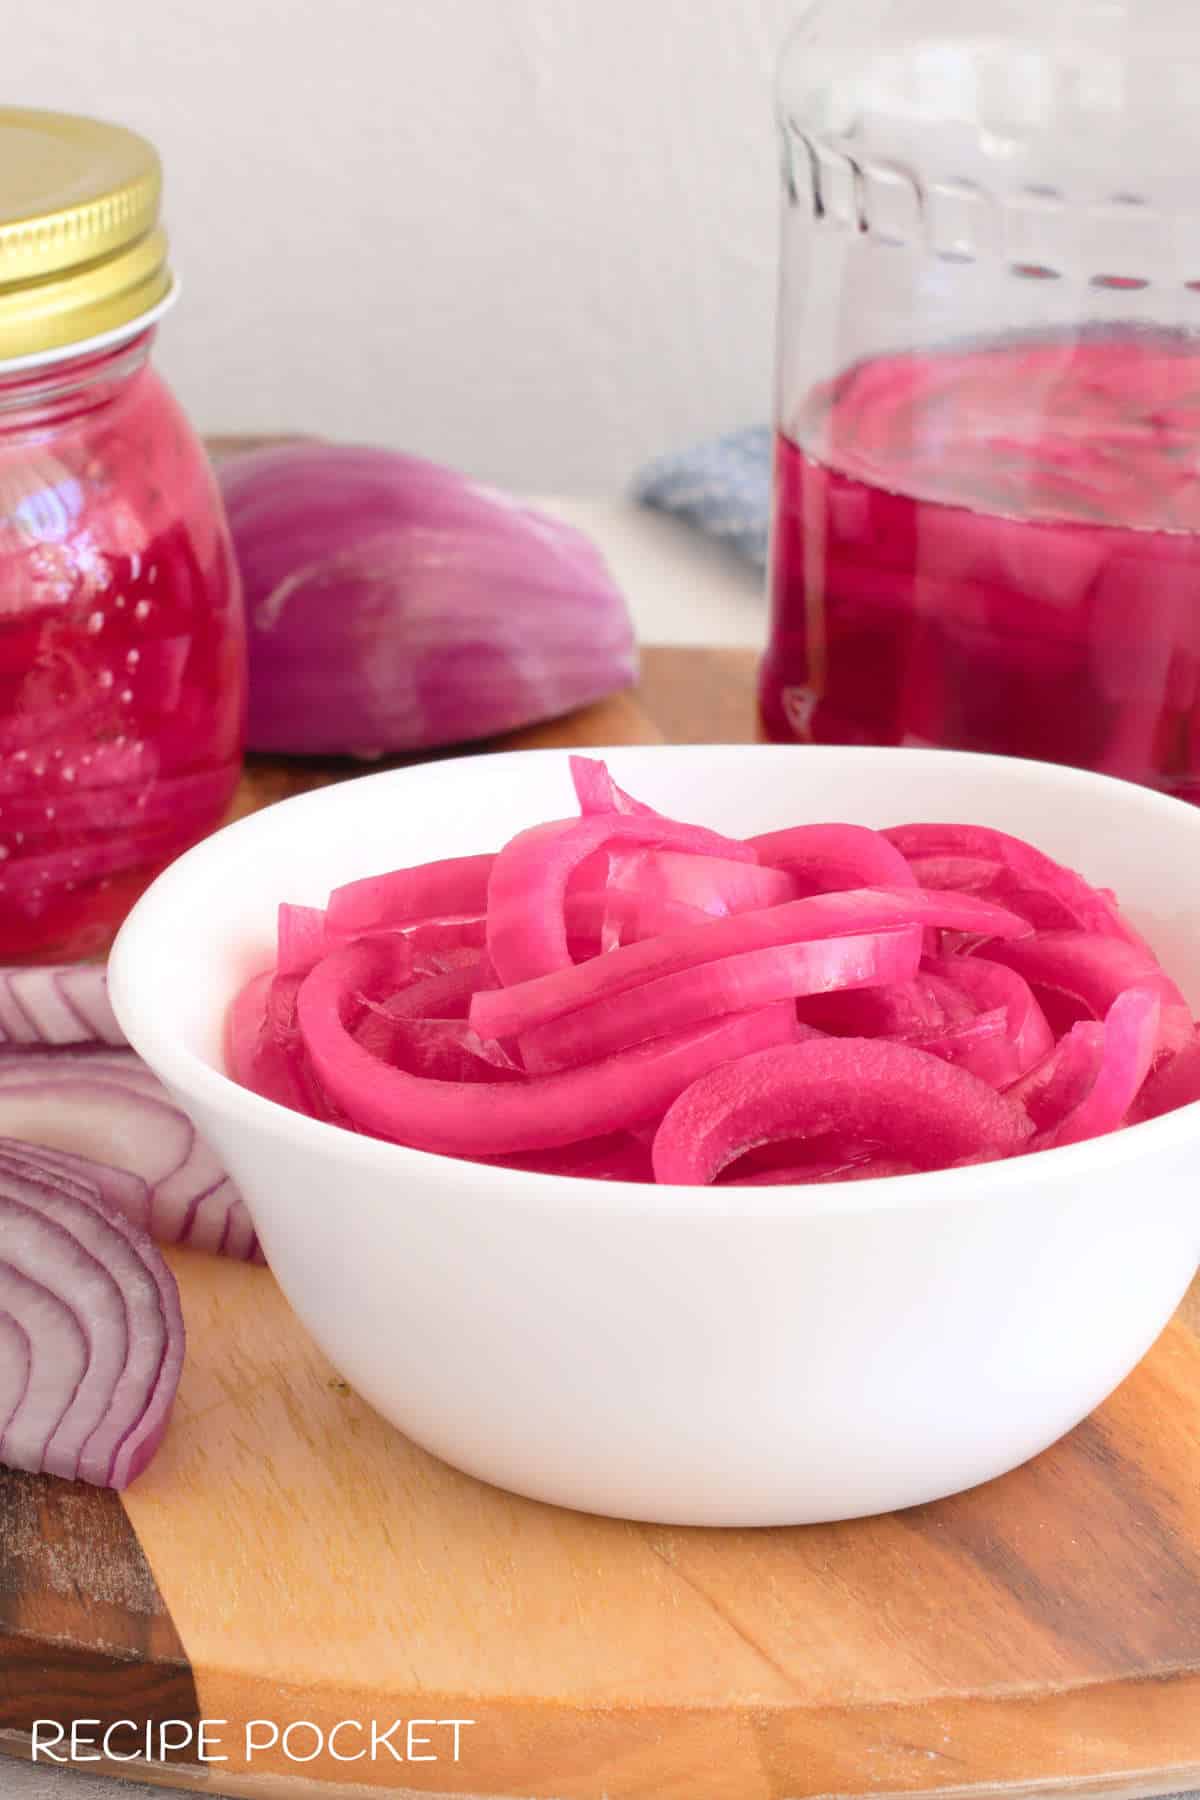 A close up of pink onions in a white bowl.